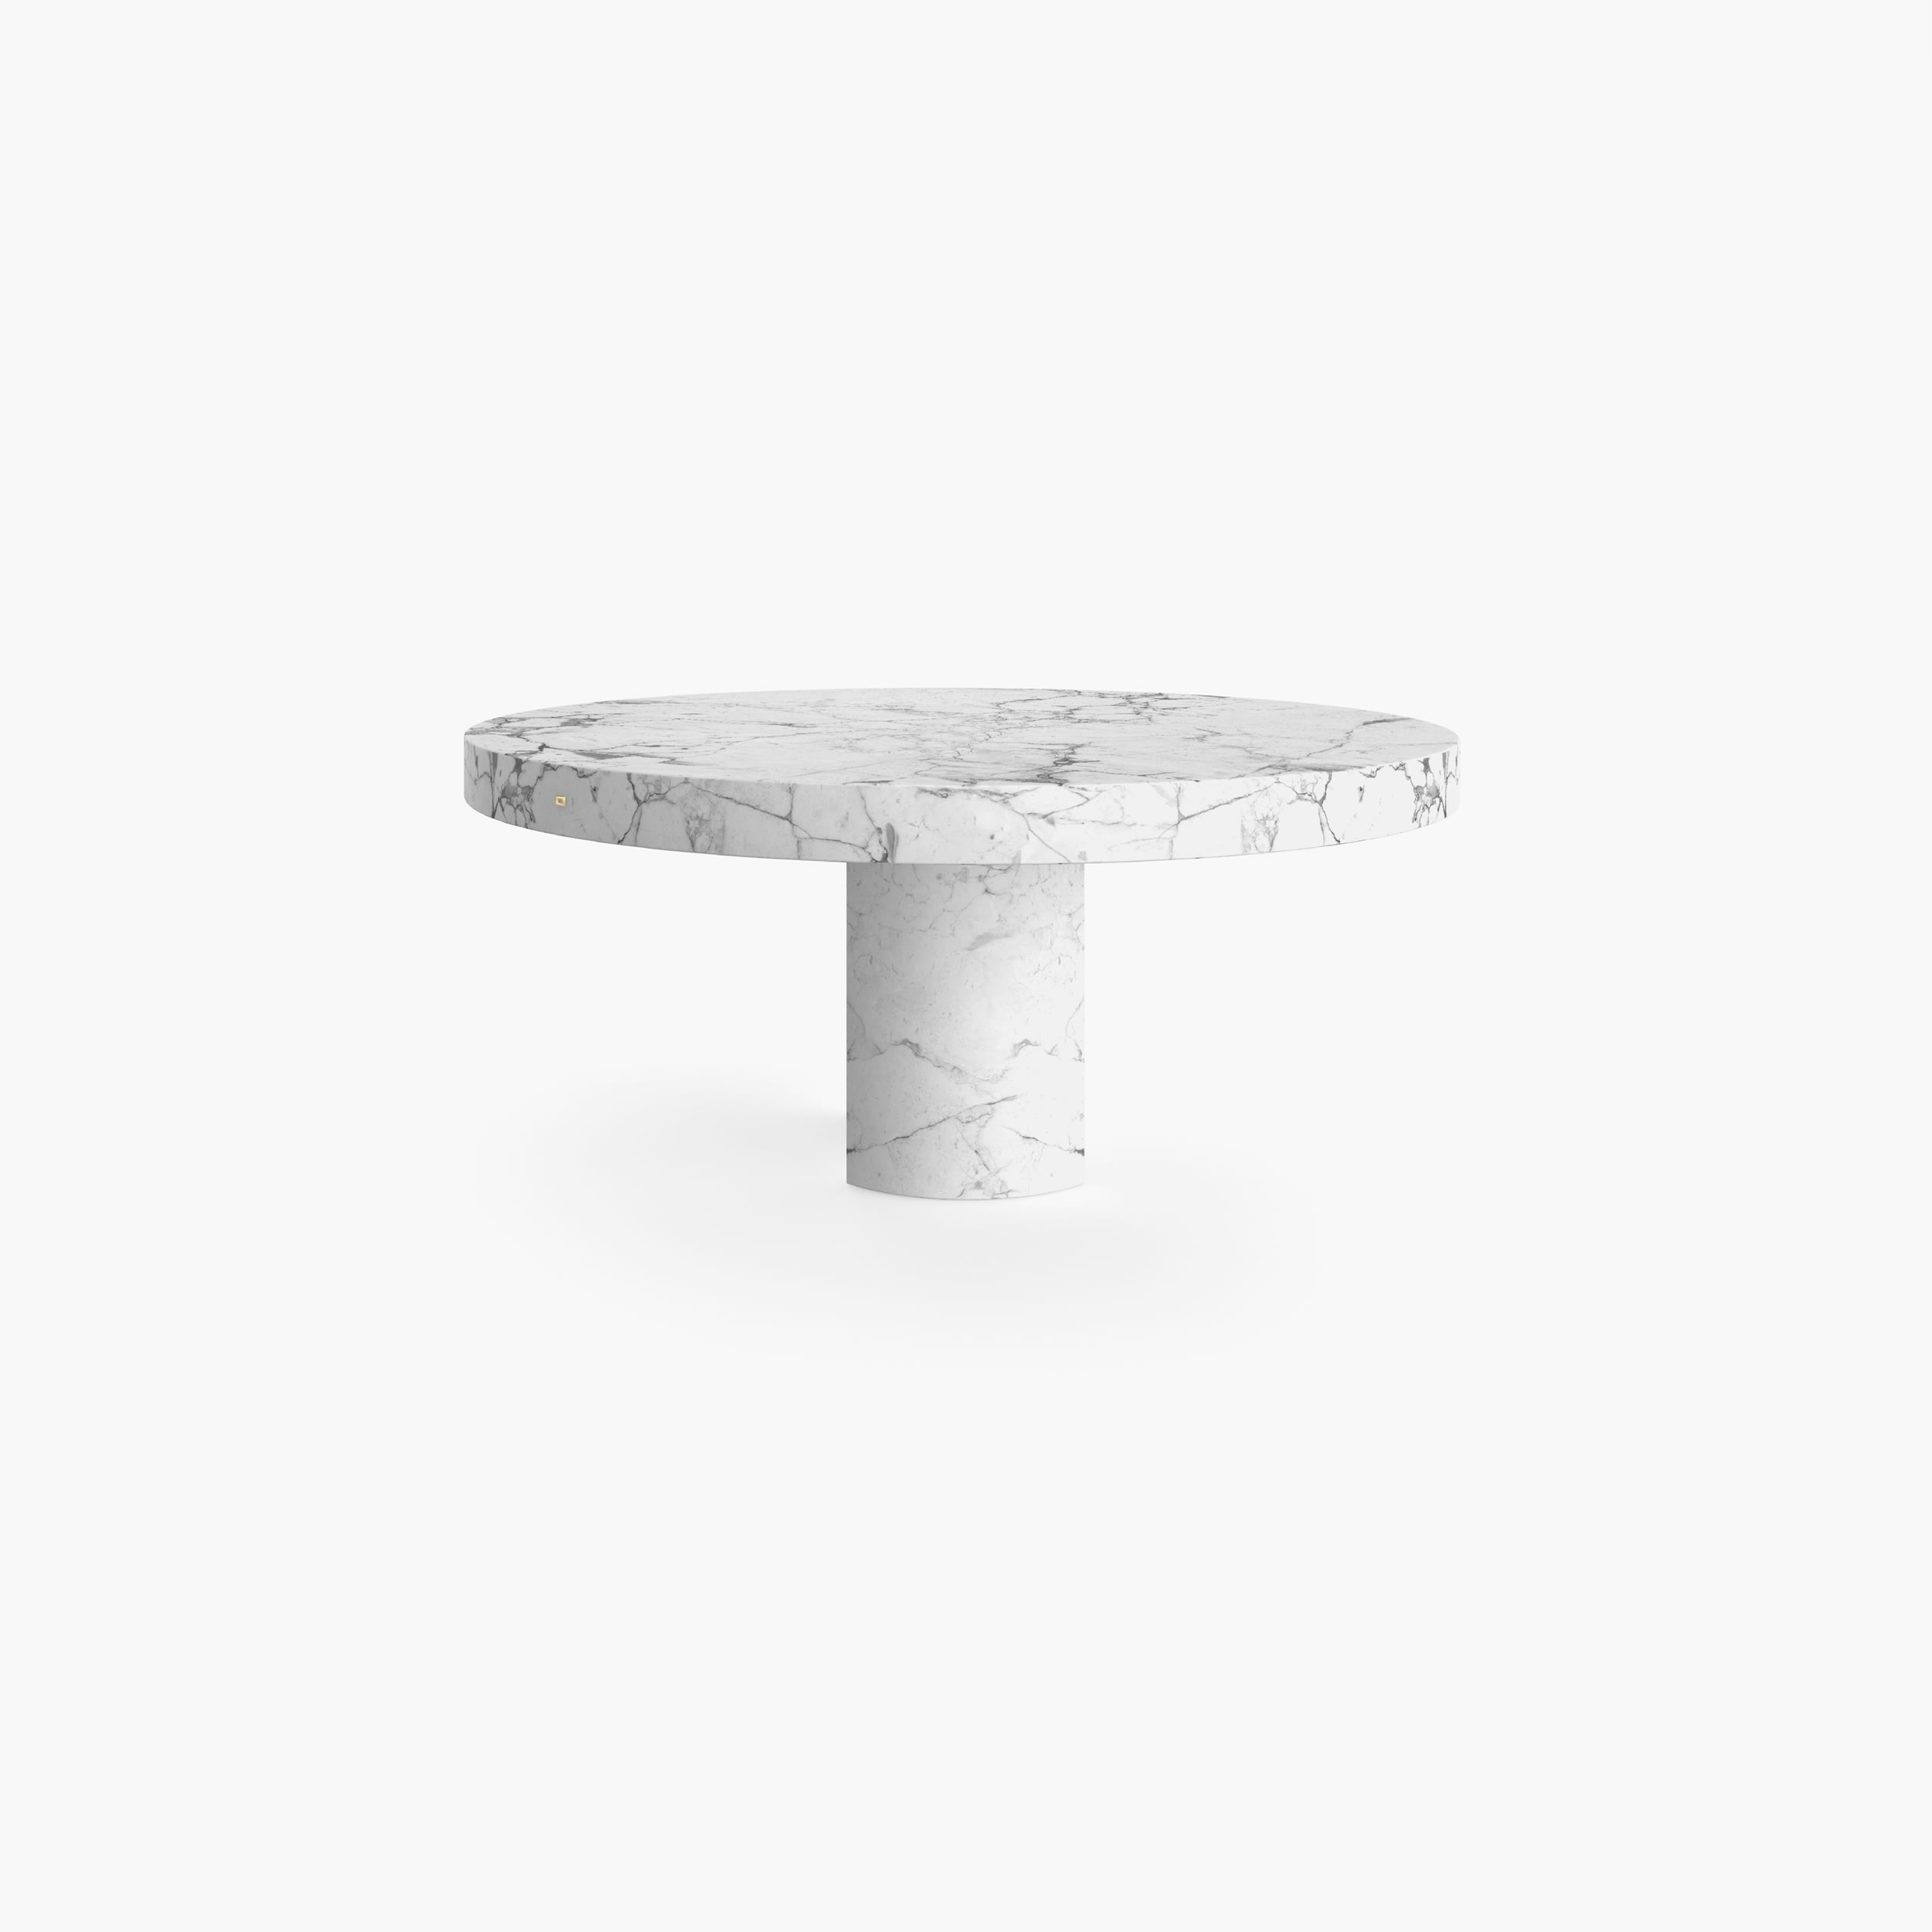 Dining Table round quarter cylinder segments legs White Grand Antique Marble statement Dining Room furniture design Dining Tables FS 194 A FELIX SCHWAKE